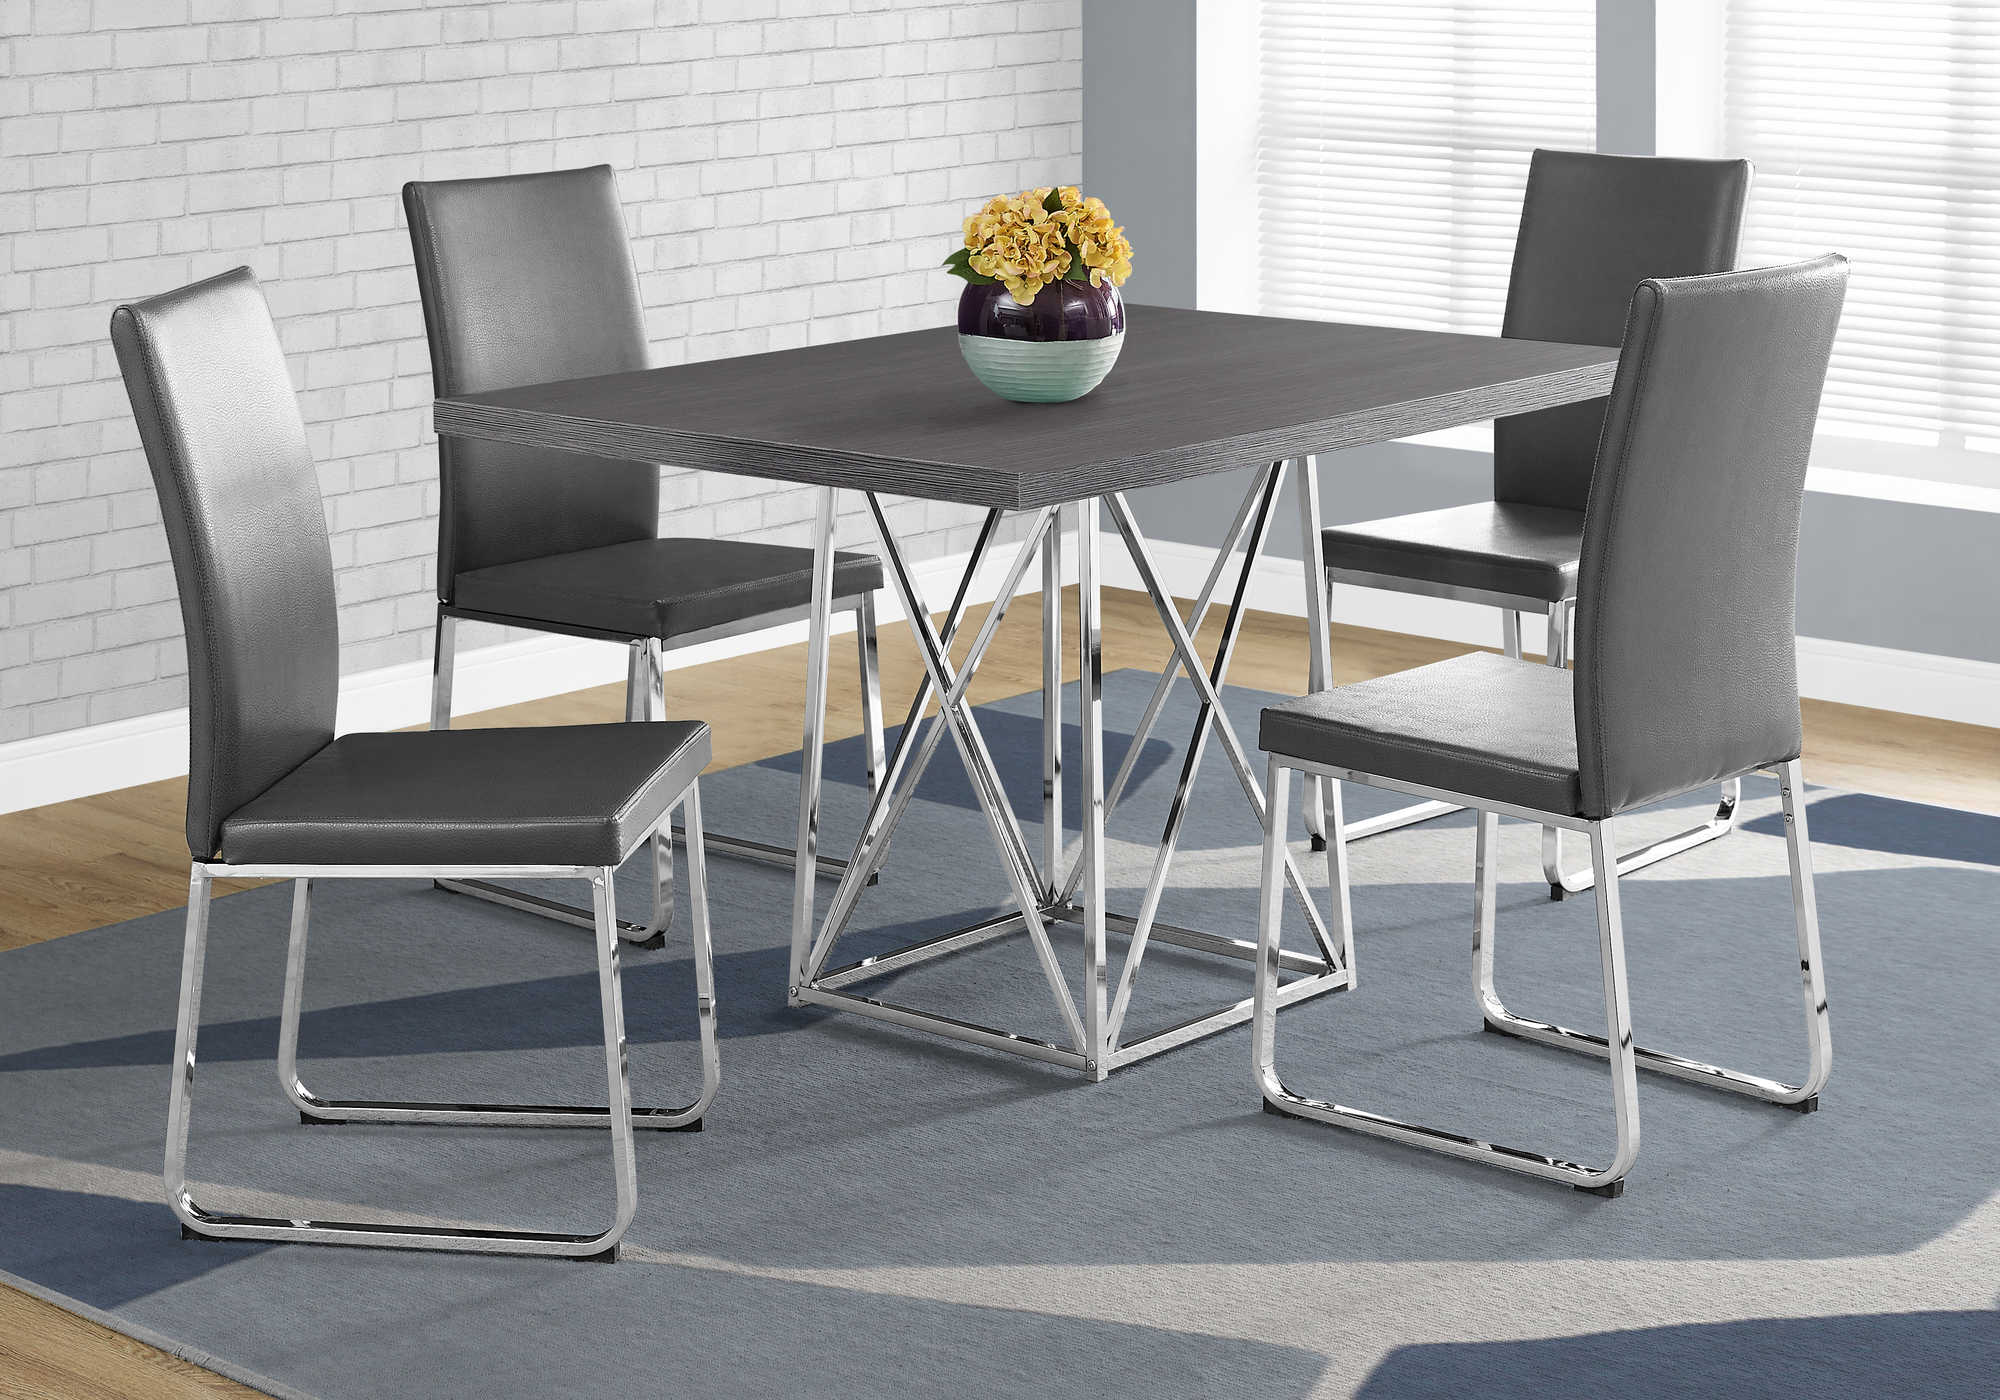 DINING CHAIR - 2PCS / 38"H / GREY LEATHER-LOOK / CHROME